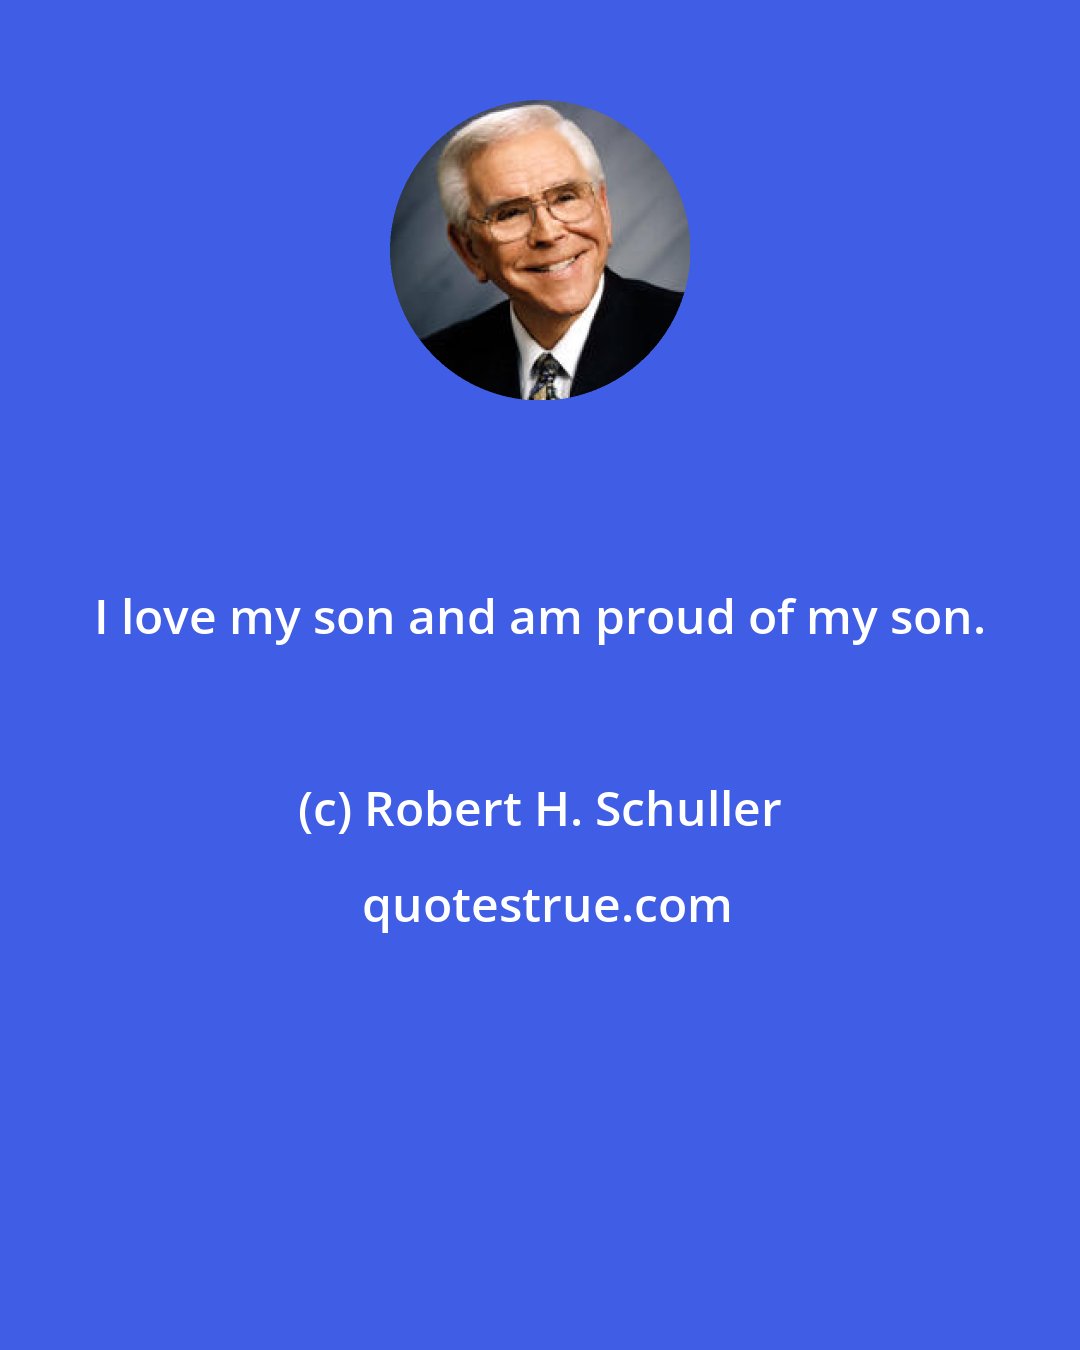 Robert H. Schuller: I love my son and am proud of my son.